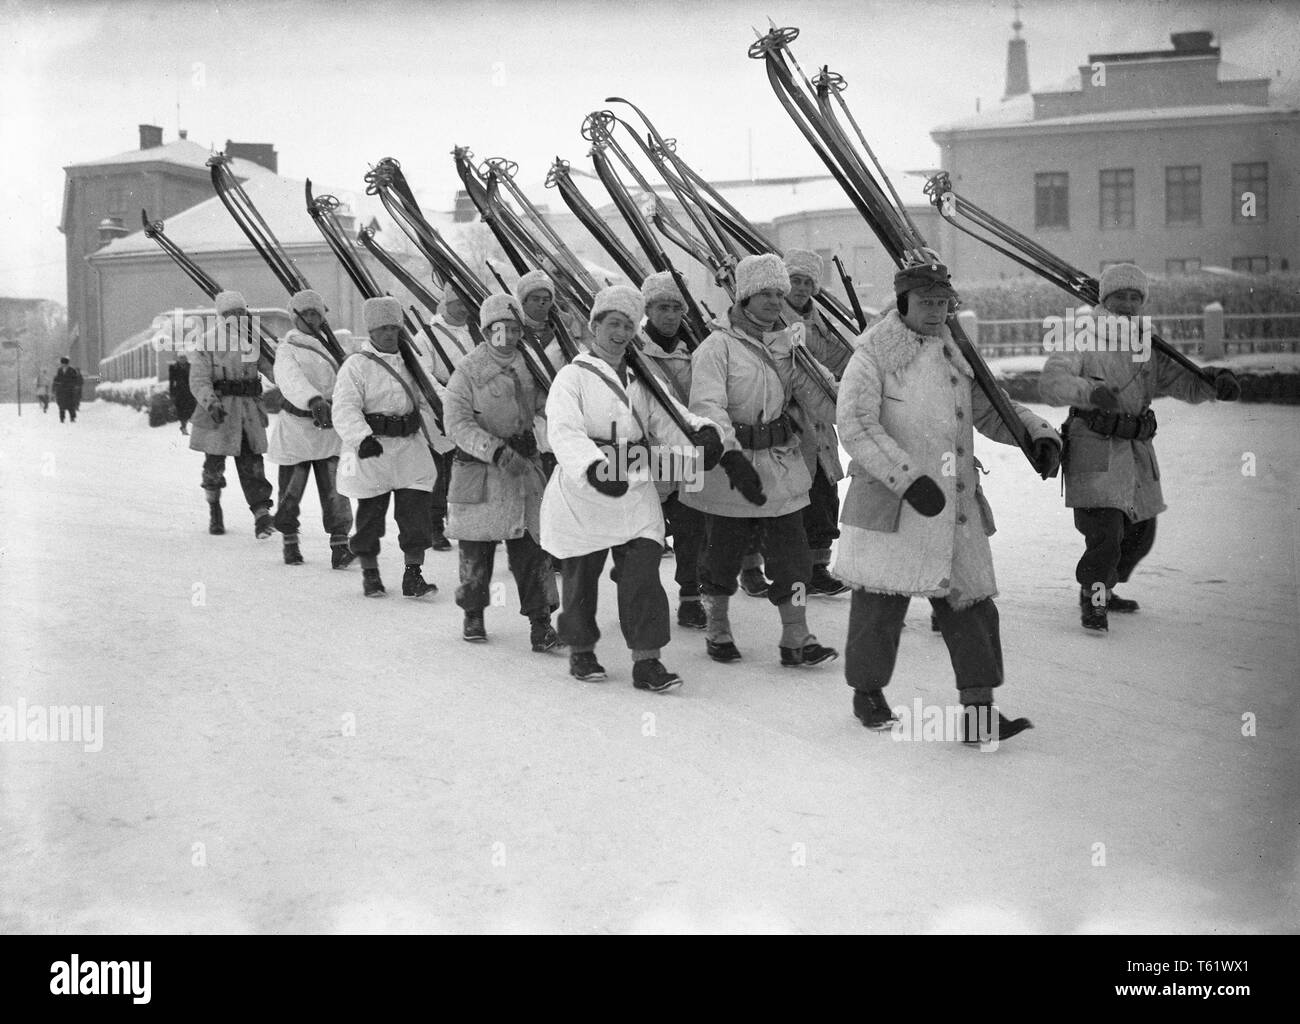 The Winter War. A military conflict between the Soviet union and Finland. It began with a Soviet invasion on november 1939 when Soviet infantery crossed the border on the Karelian Isthmus. About 9500 Swedish volunteer soldiers participated in the war.  Pictured Danish volunteer soldiers marching. January 1940. Photo Kristoffersson ref 100-10 Stock Photo